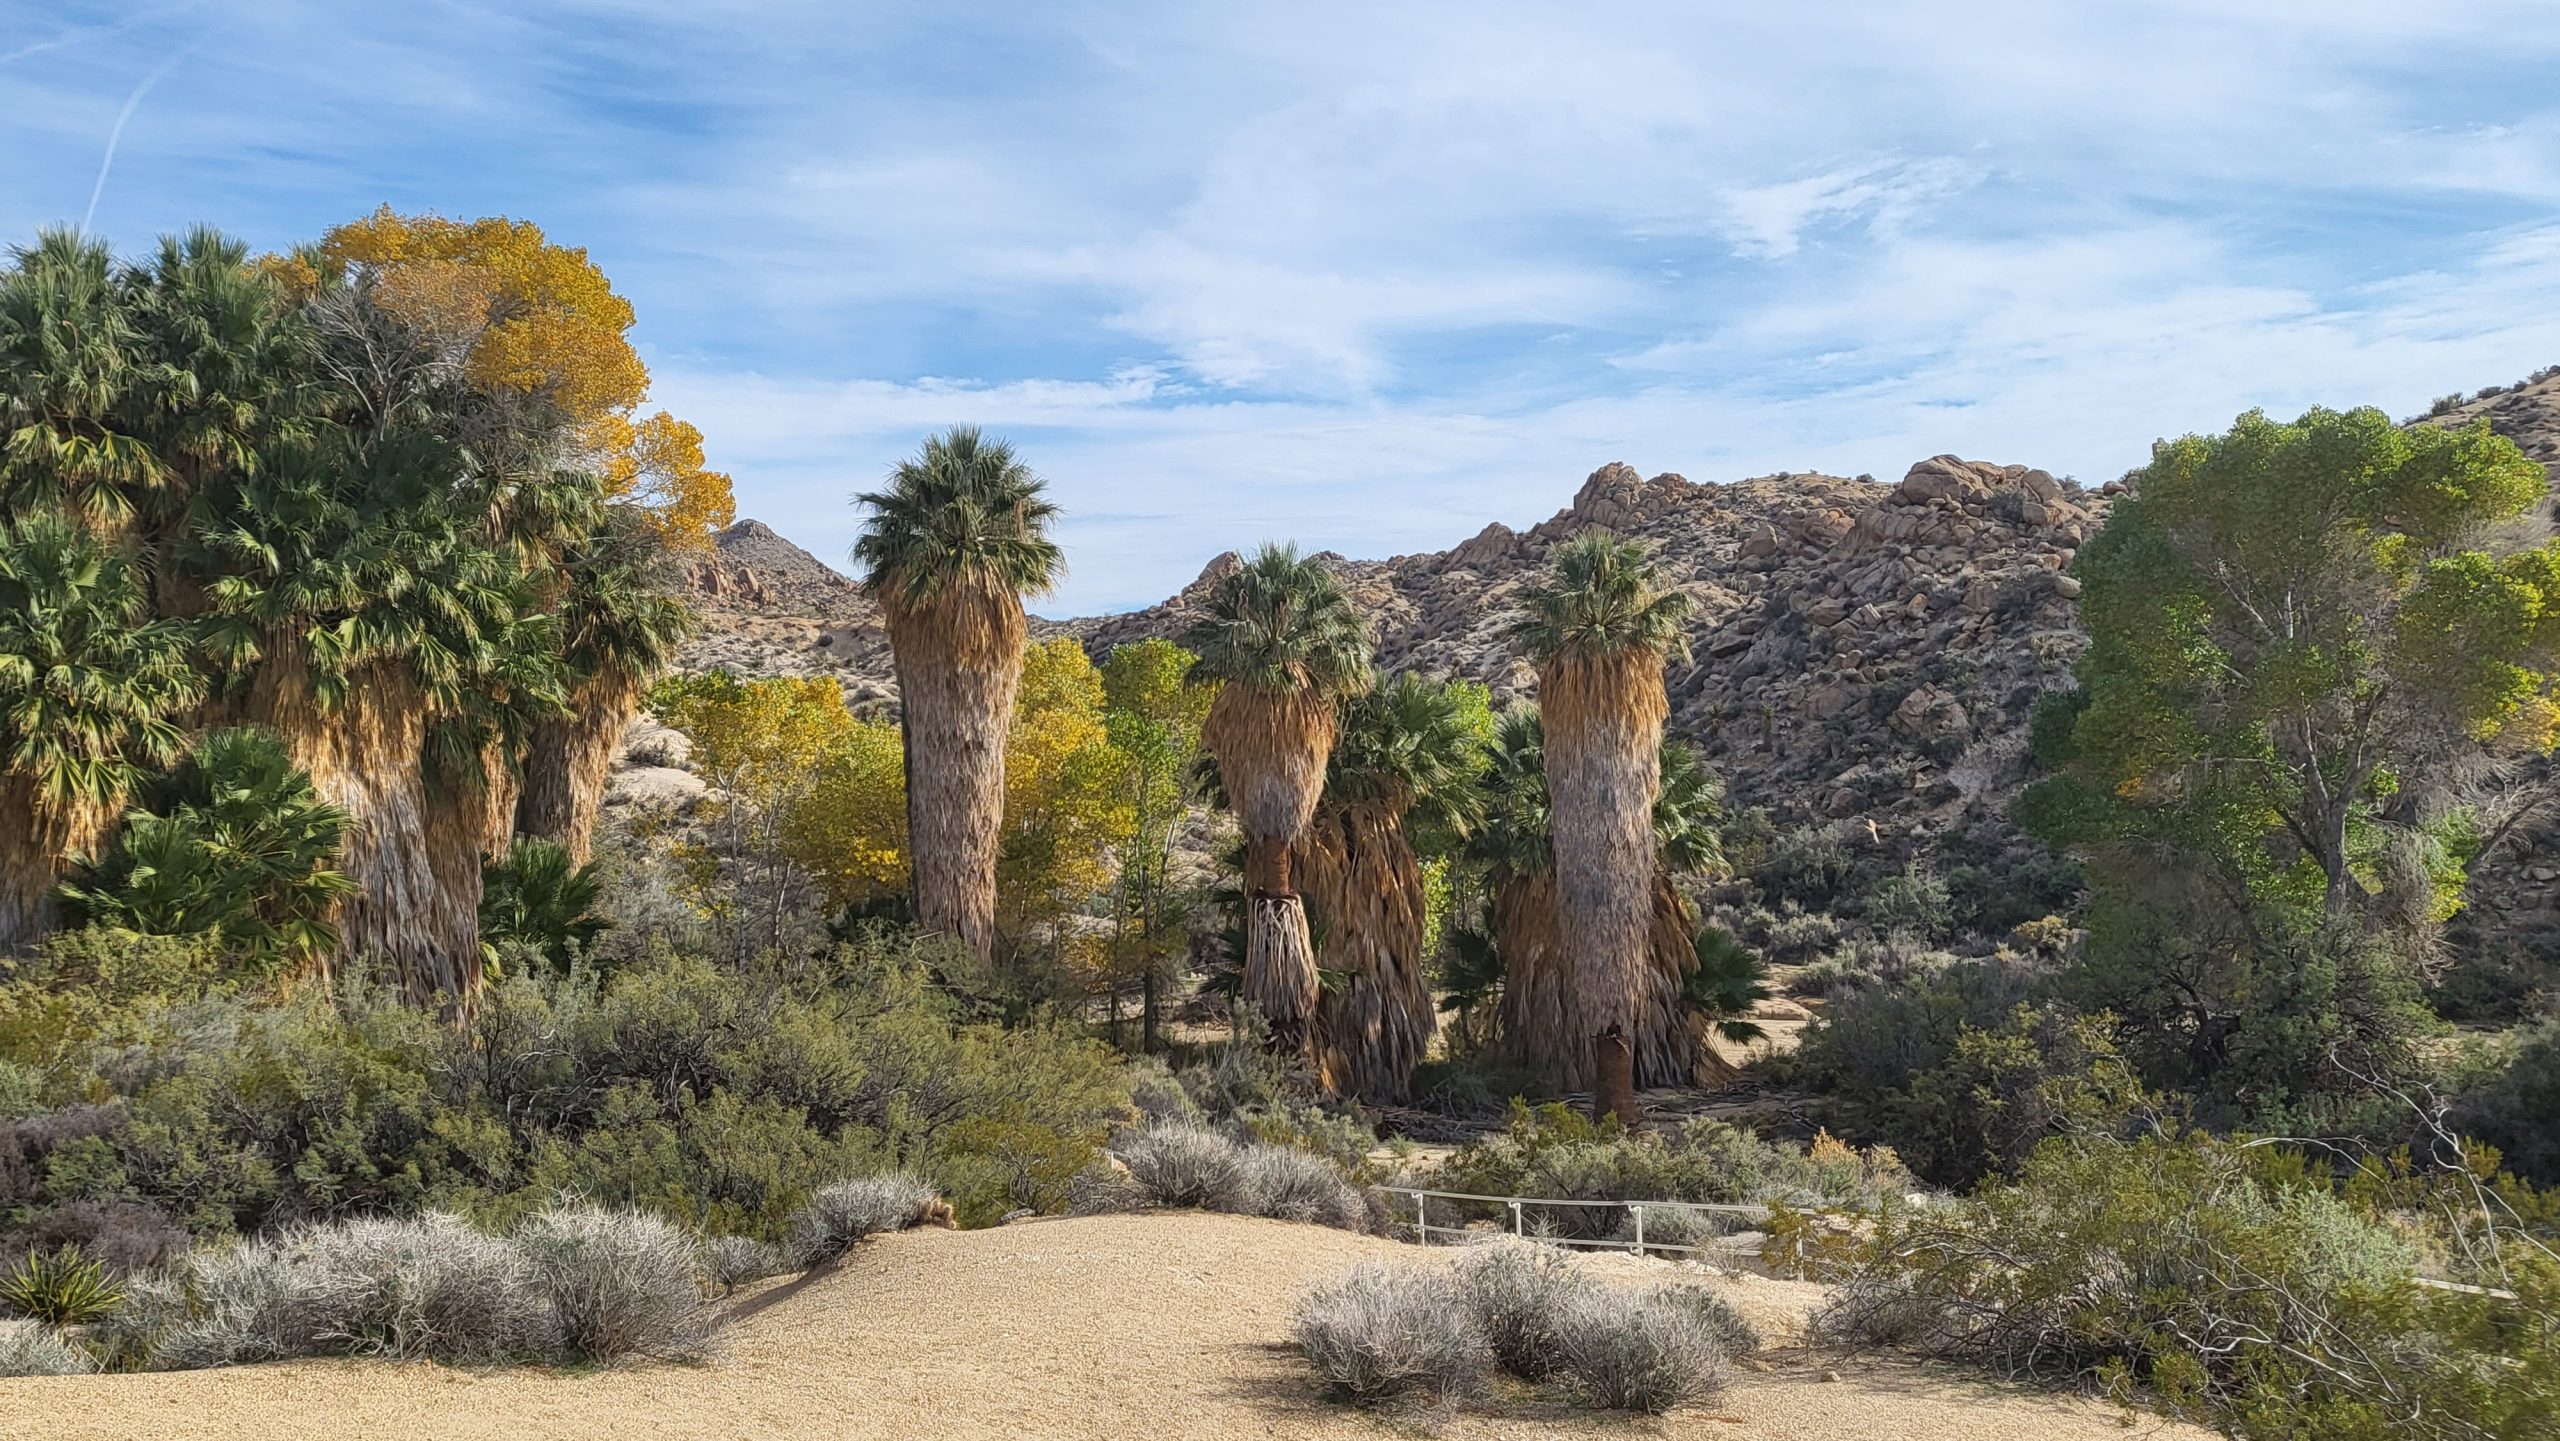 Lost Fingers Oasis Path in Joshua Tree Nationwide Park, California – December 2022